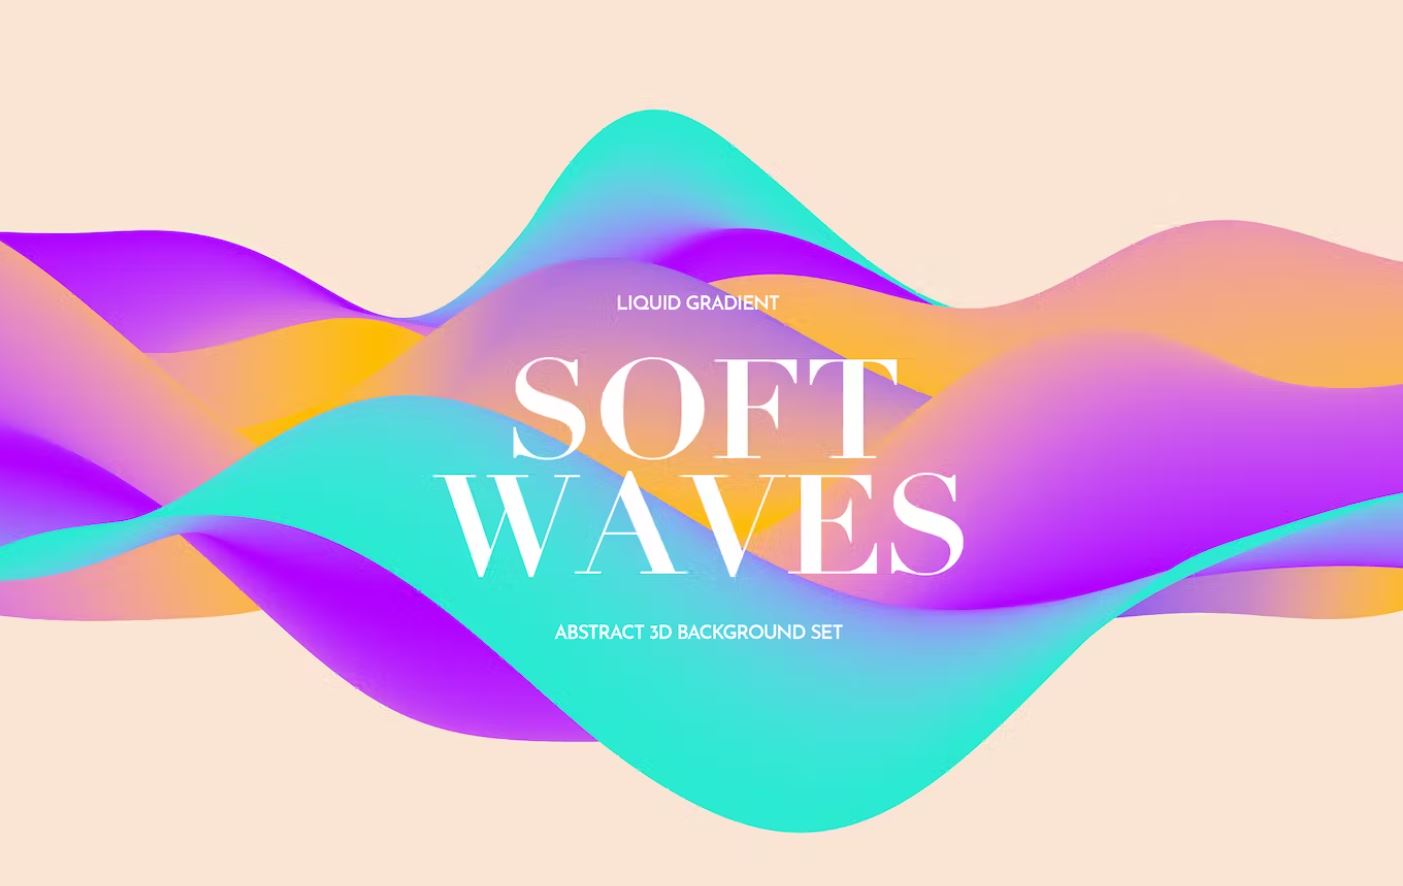 Gritty gradient backgrounds with soft waves